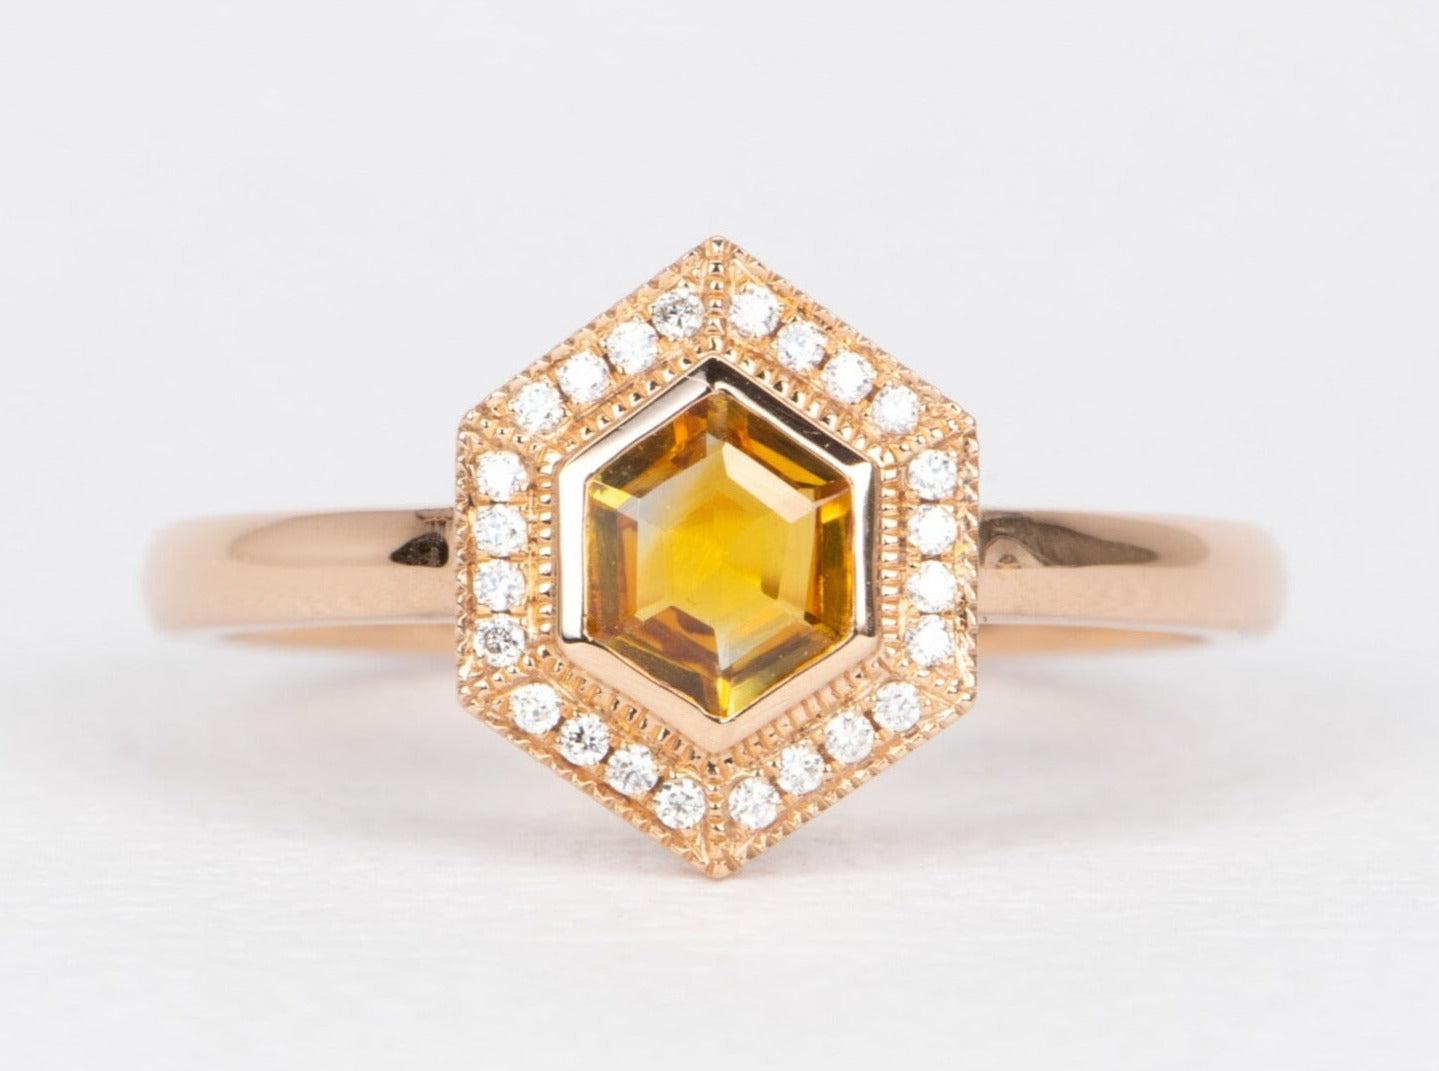 ♥ Solid 14K gold ring set with a bi-color Montana sapphire in the center in a bezel set style, then surrounded by a halo of brilliant colorless diamonds with delicate milgrain 
♥ This setting measures 11 mm in length, 9 mm in width, 3.2 mm in